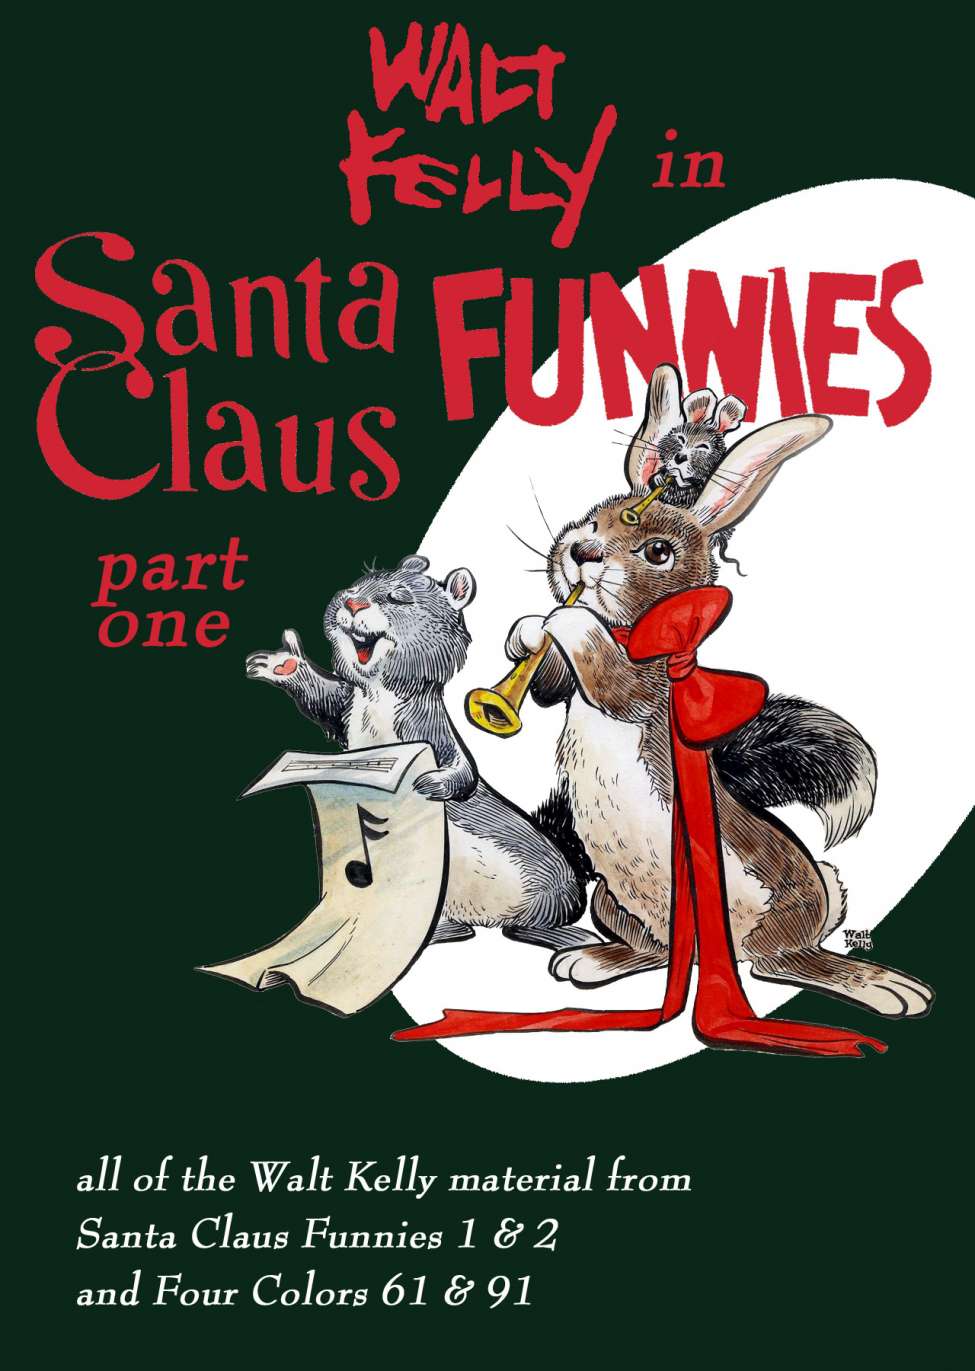 Comic Book Cover For Walt Kelly in Santa Claus Funnies 1942-1949 - Part 1